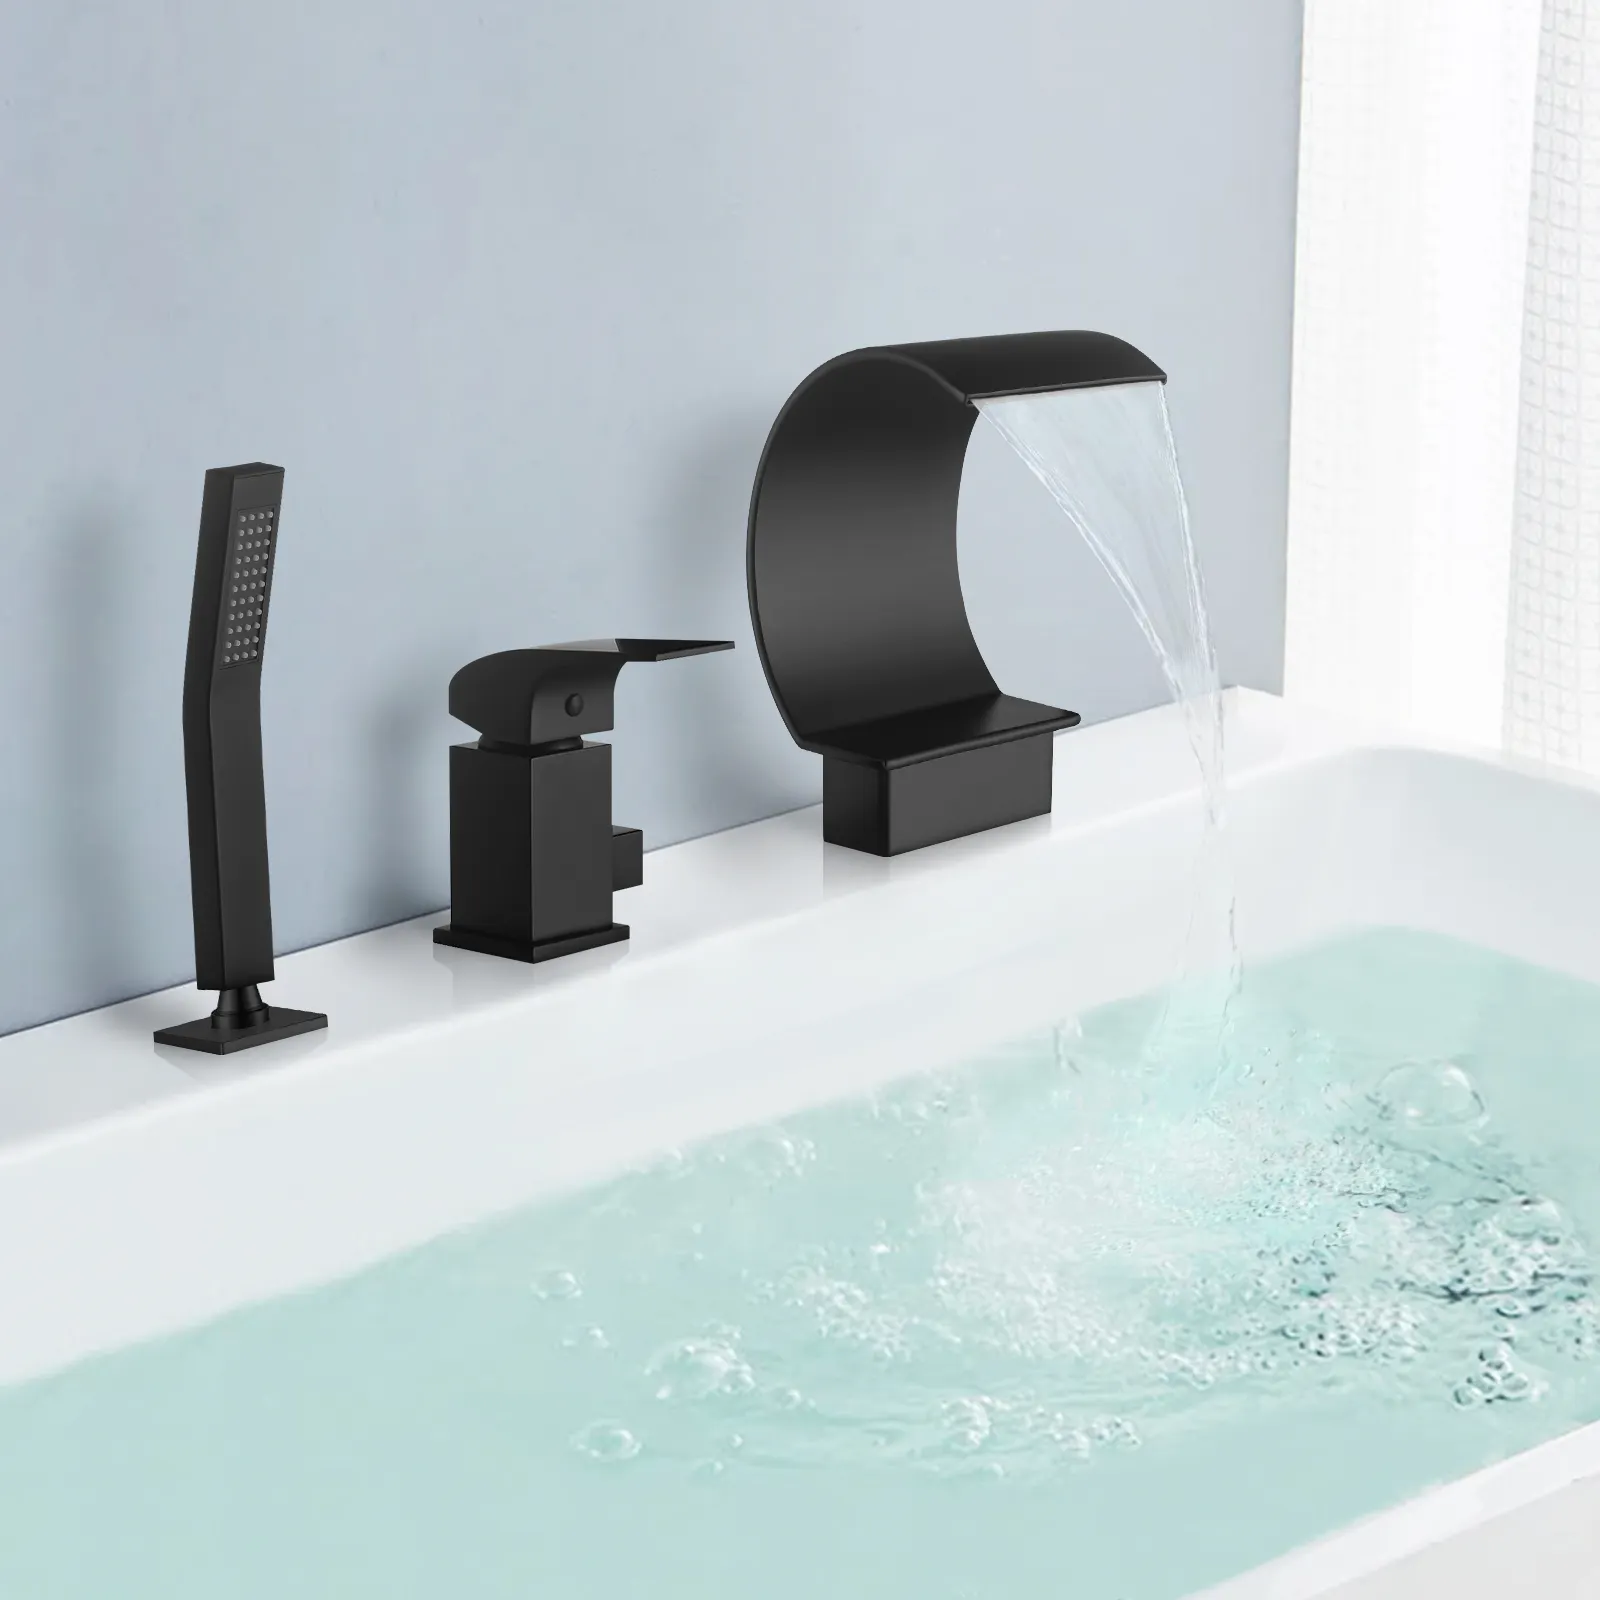 Low Price Matte Black Faucet Stainless Steel Single Handle Bathroom Sink Hot Cold Water Faucet Tap Matte Black